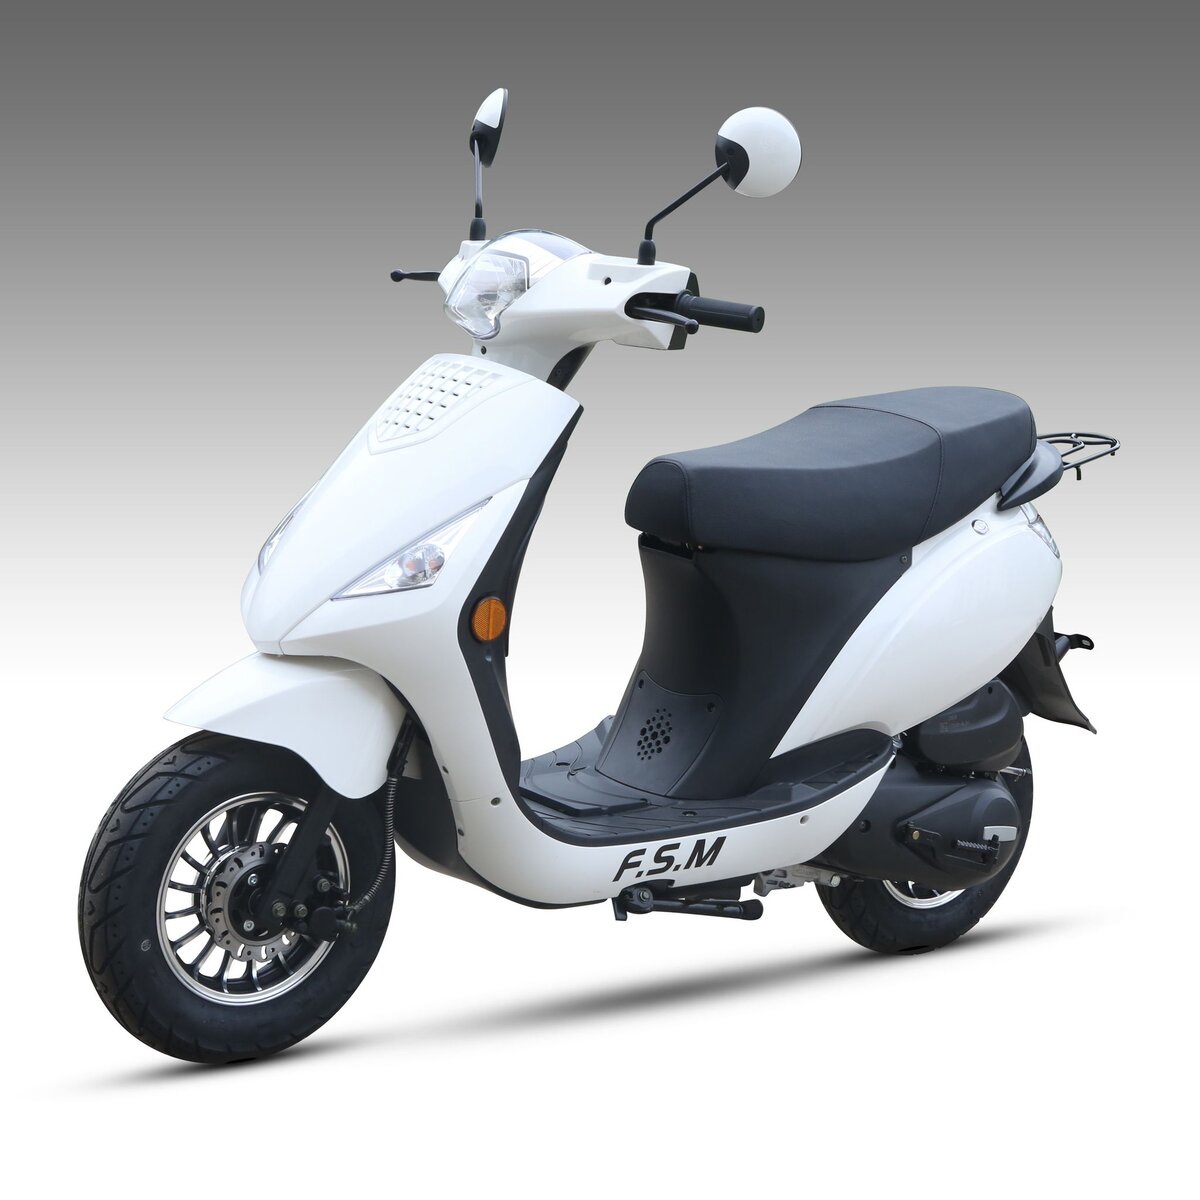 F.S.M Scooter 50 cc 4 temps Znen 